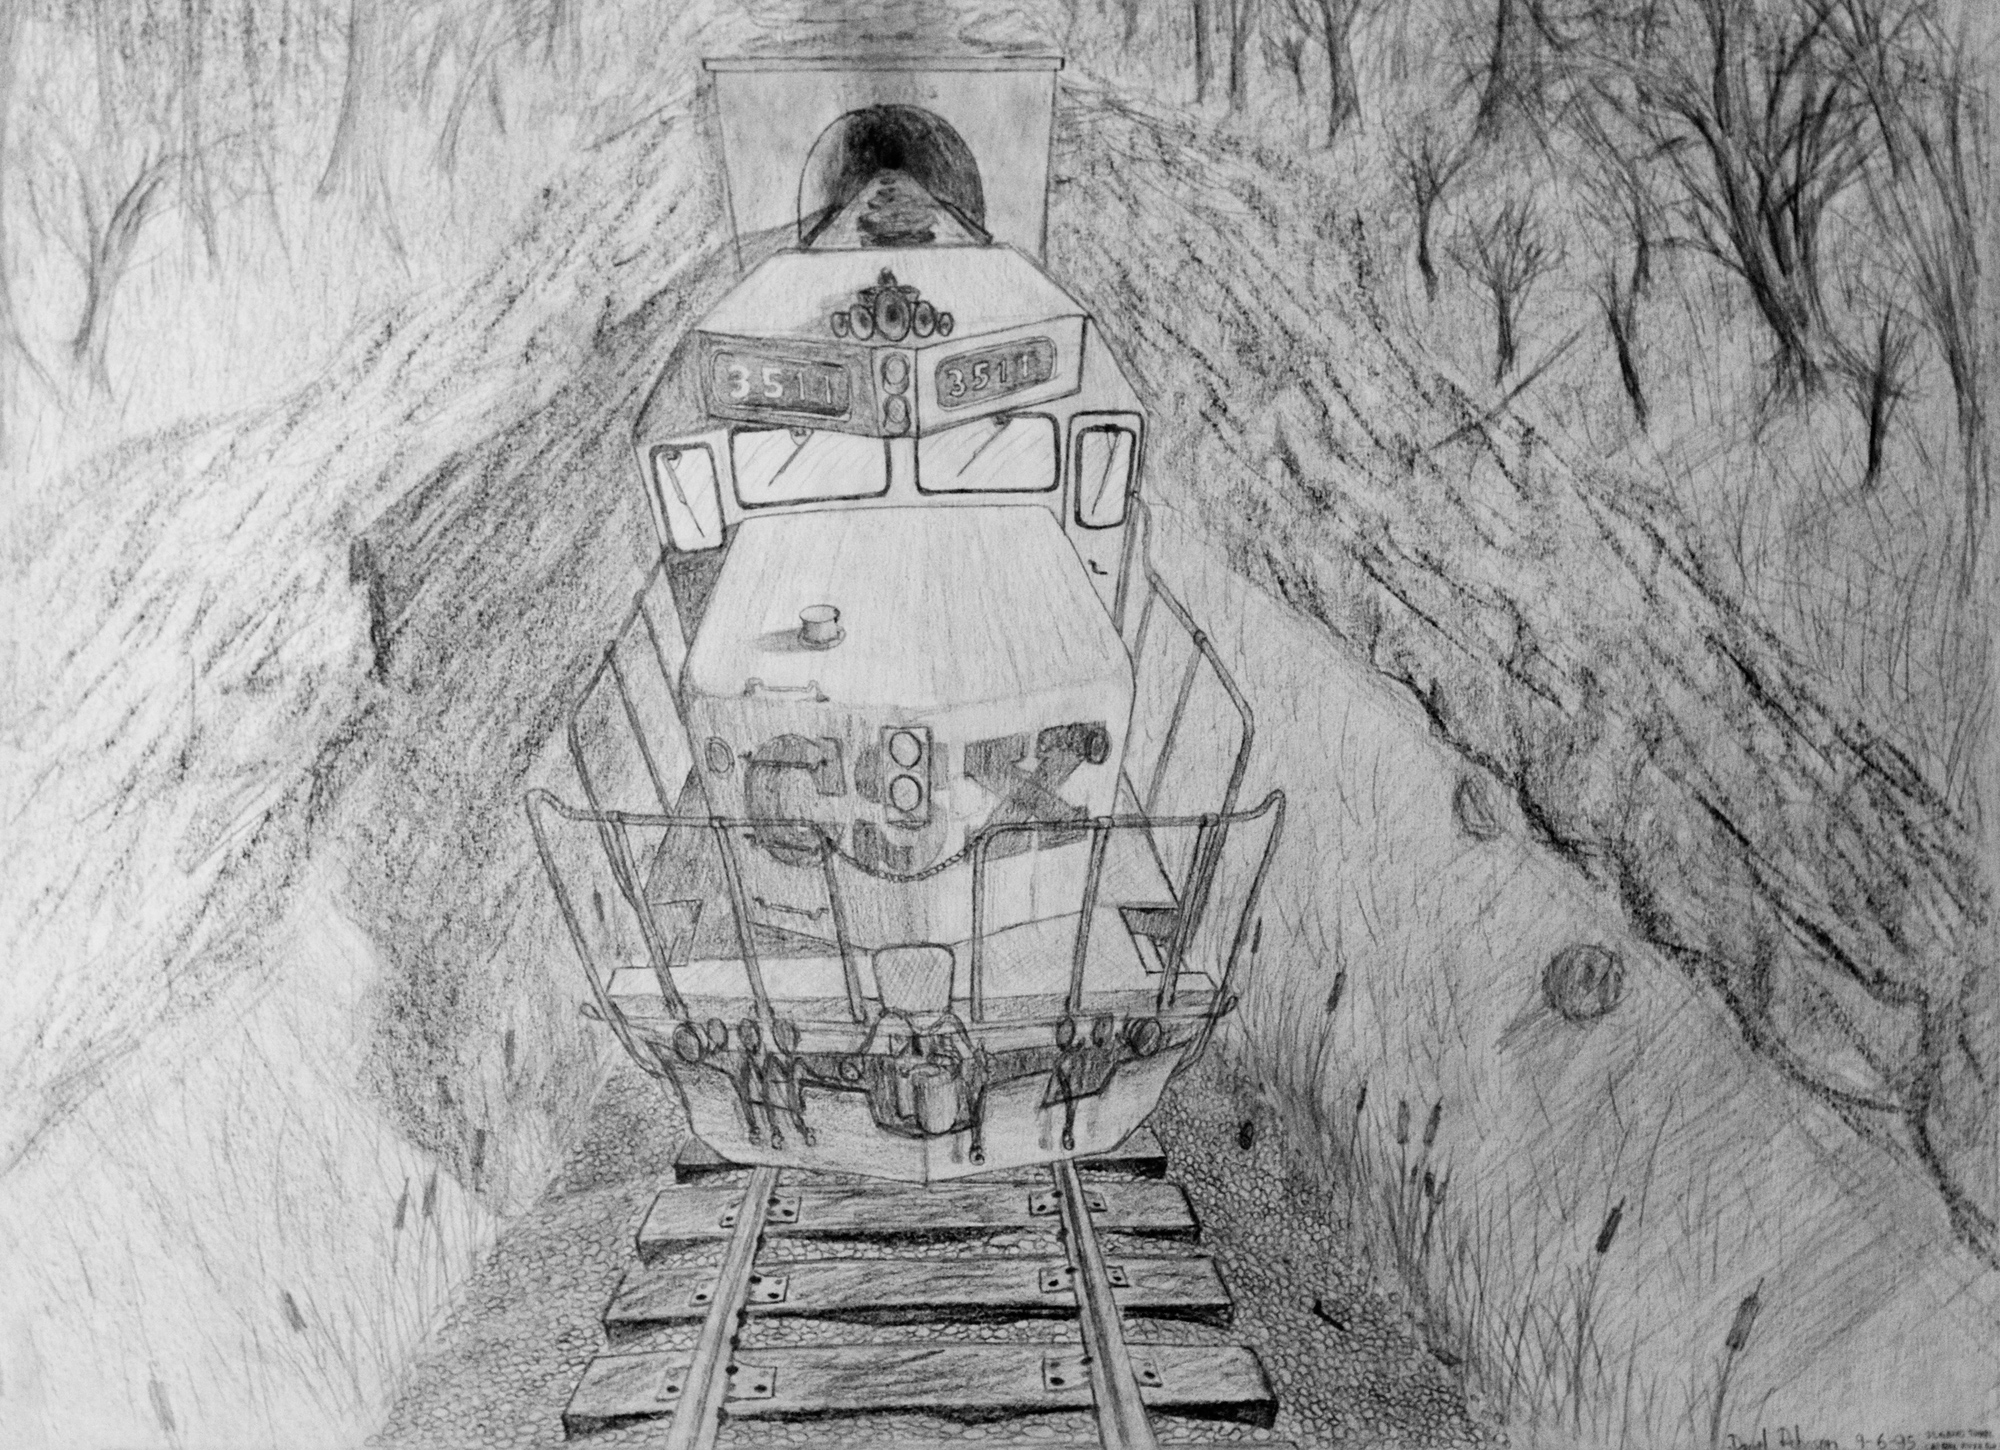 St. Albans, WV train and tunnel pencil sketch